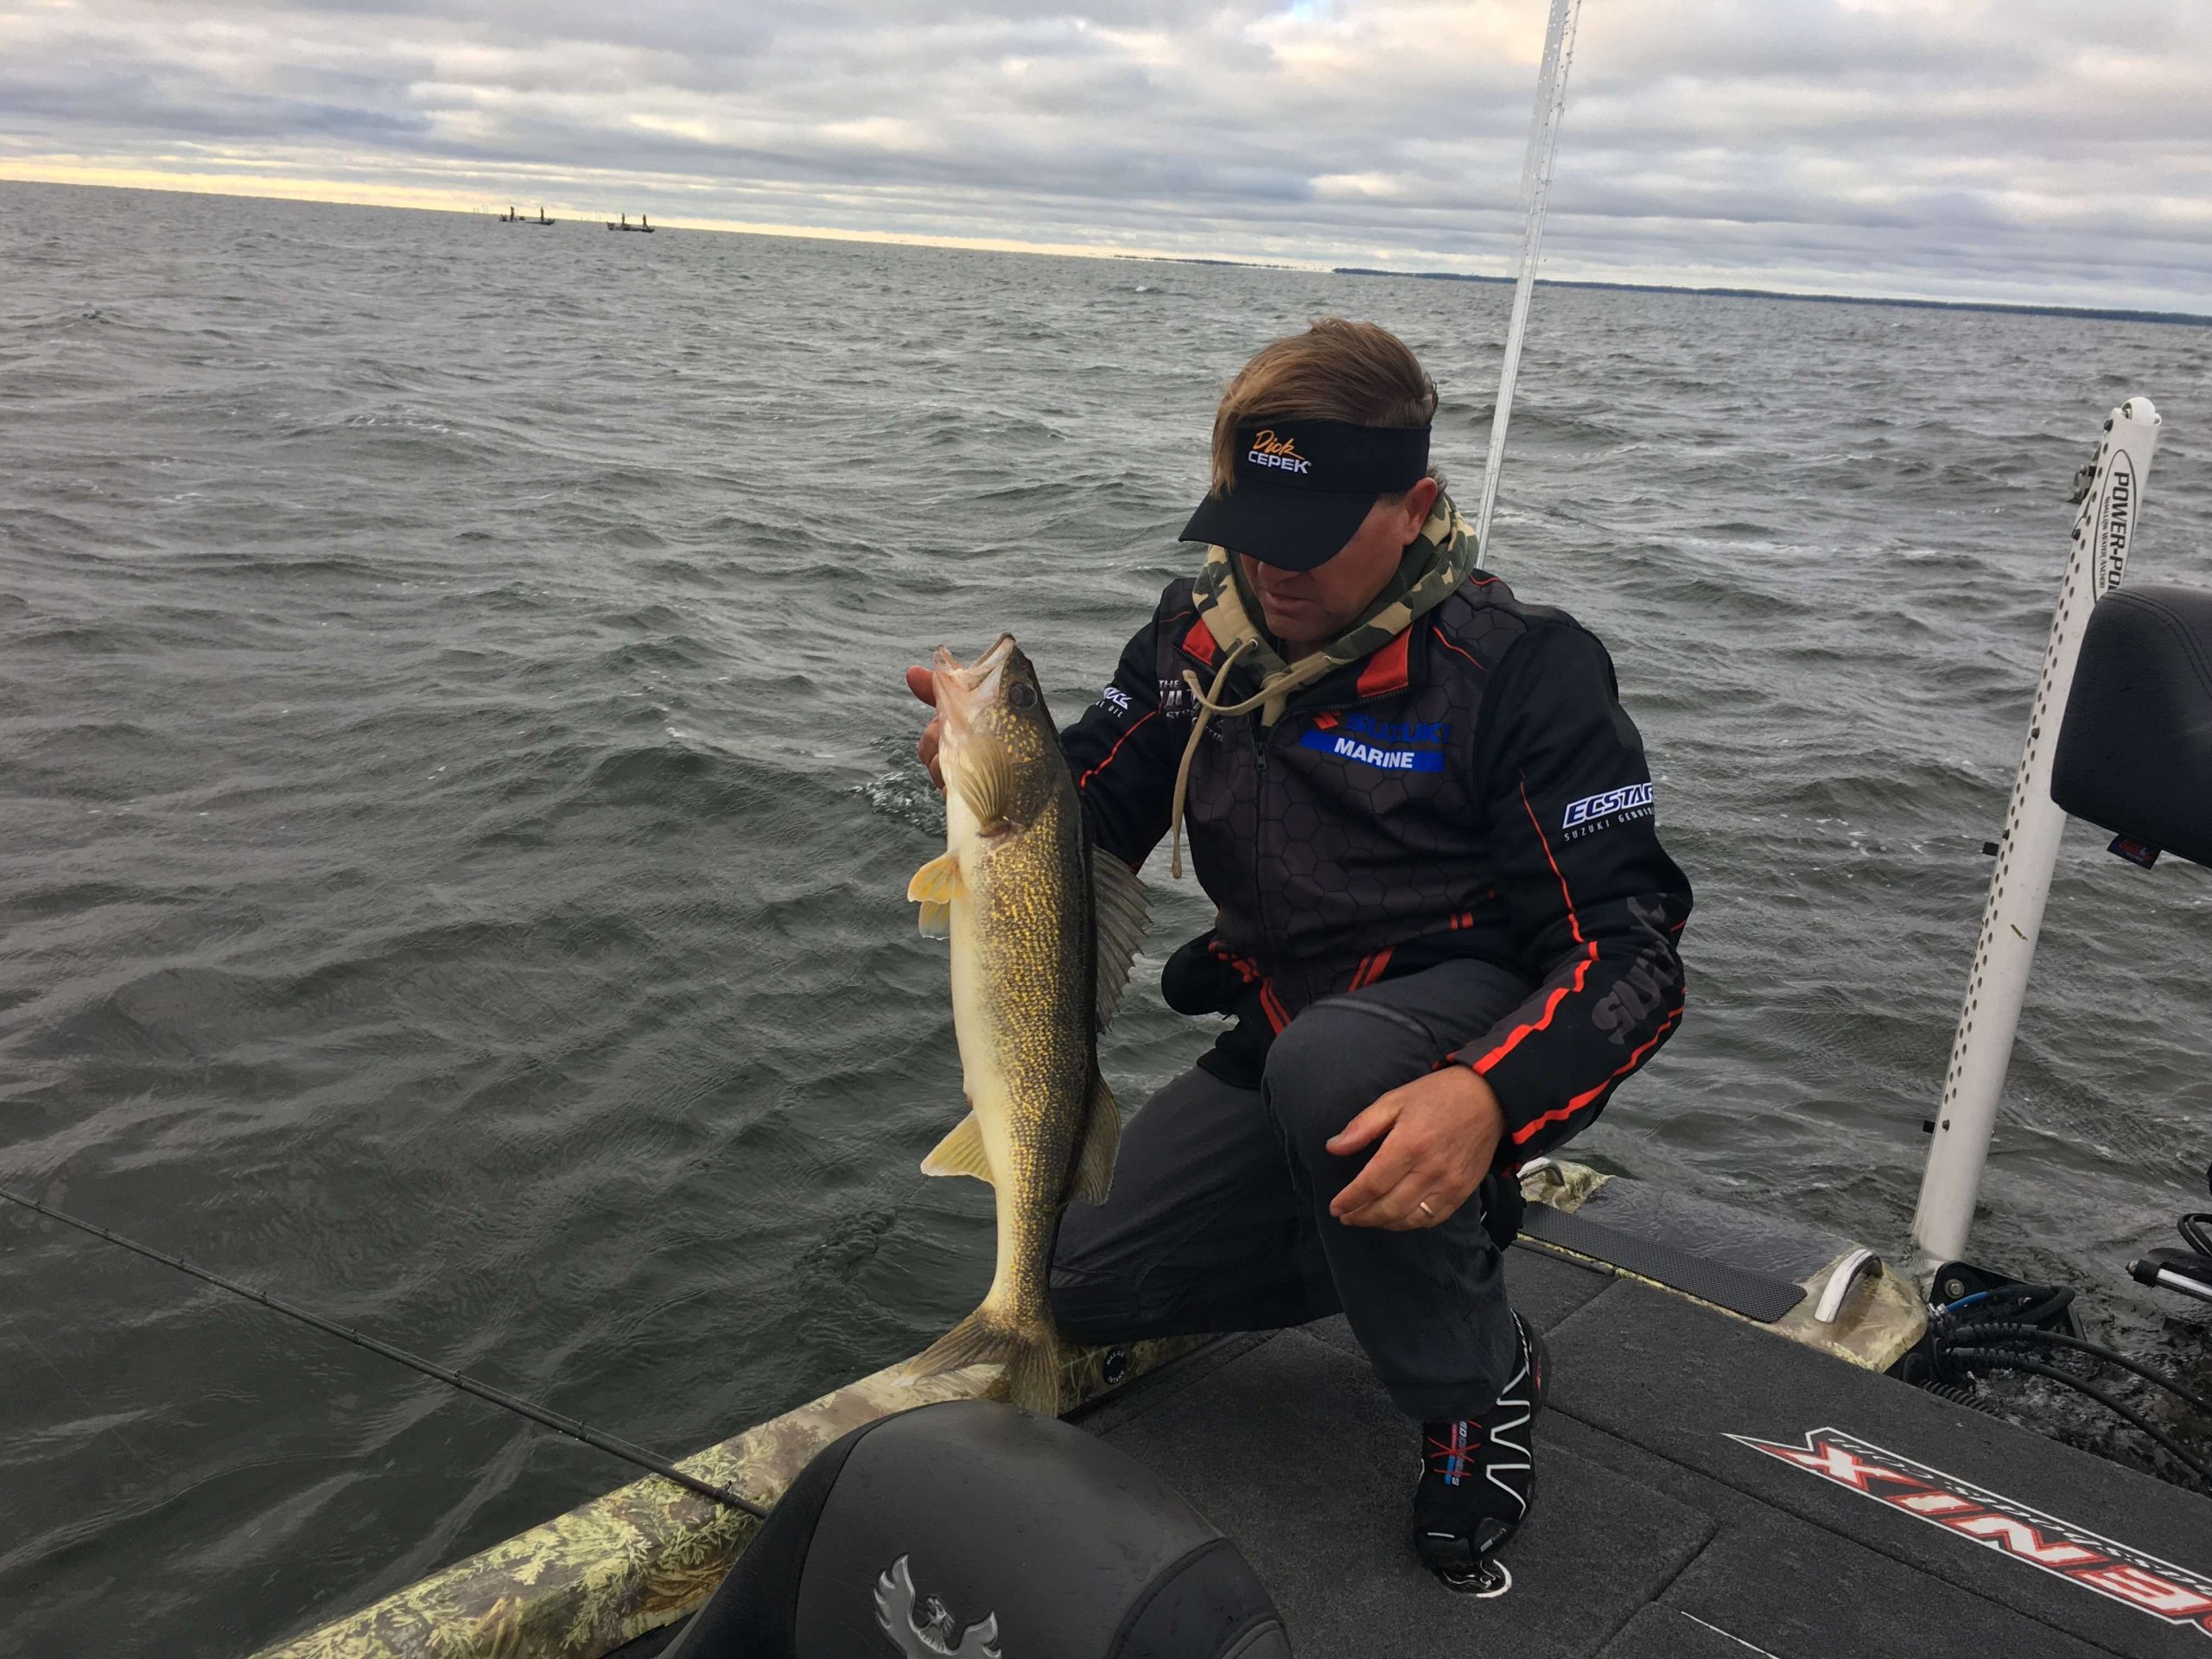 Clifford Pirch catches a nice one....unfortunately the wrong kind. Some say these walleye are close to extinction but the elites are catching them left and right.
